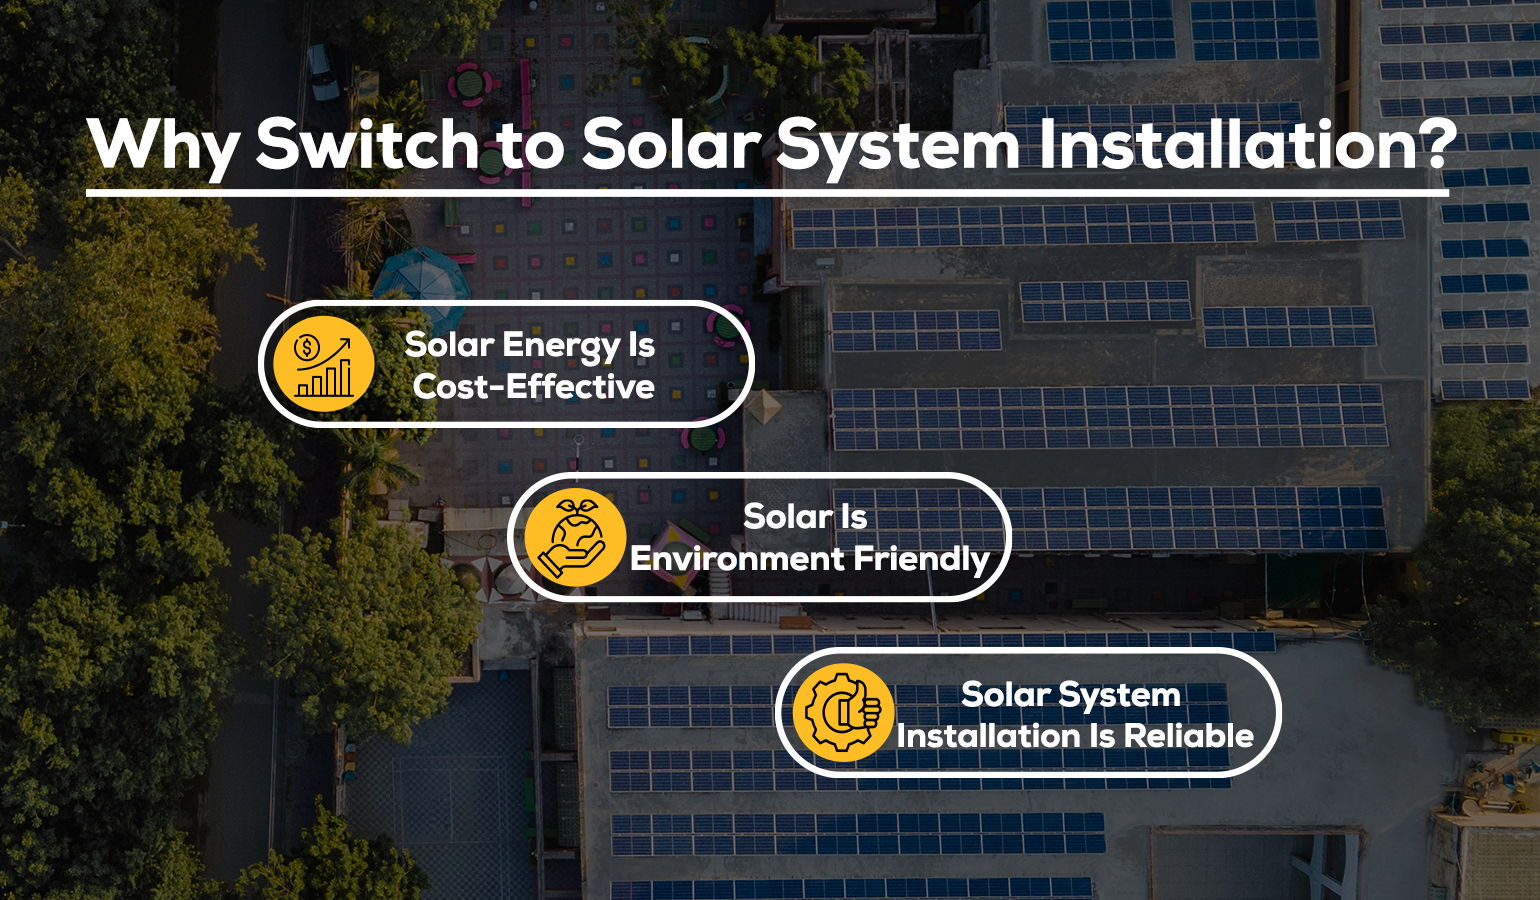 Why Switch to Solar System Installation